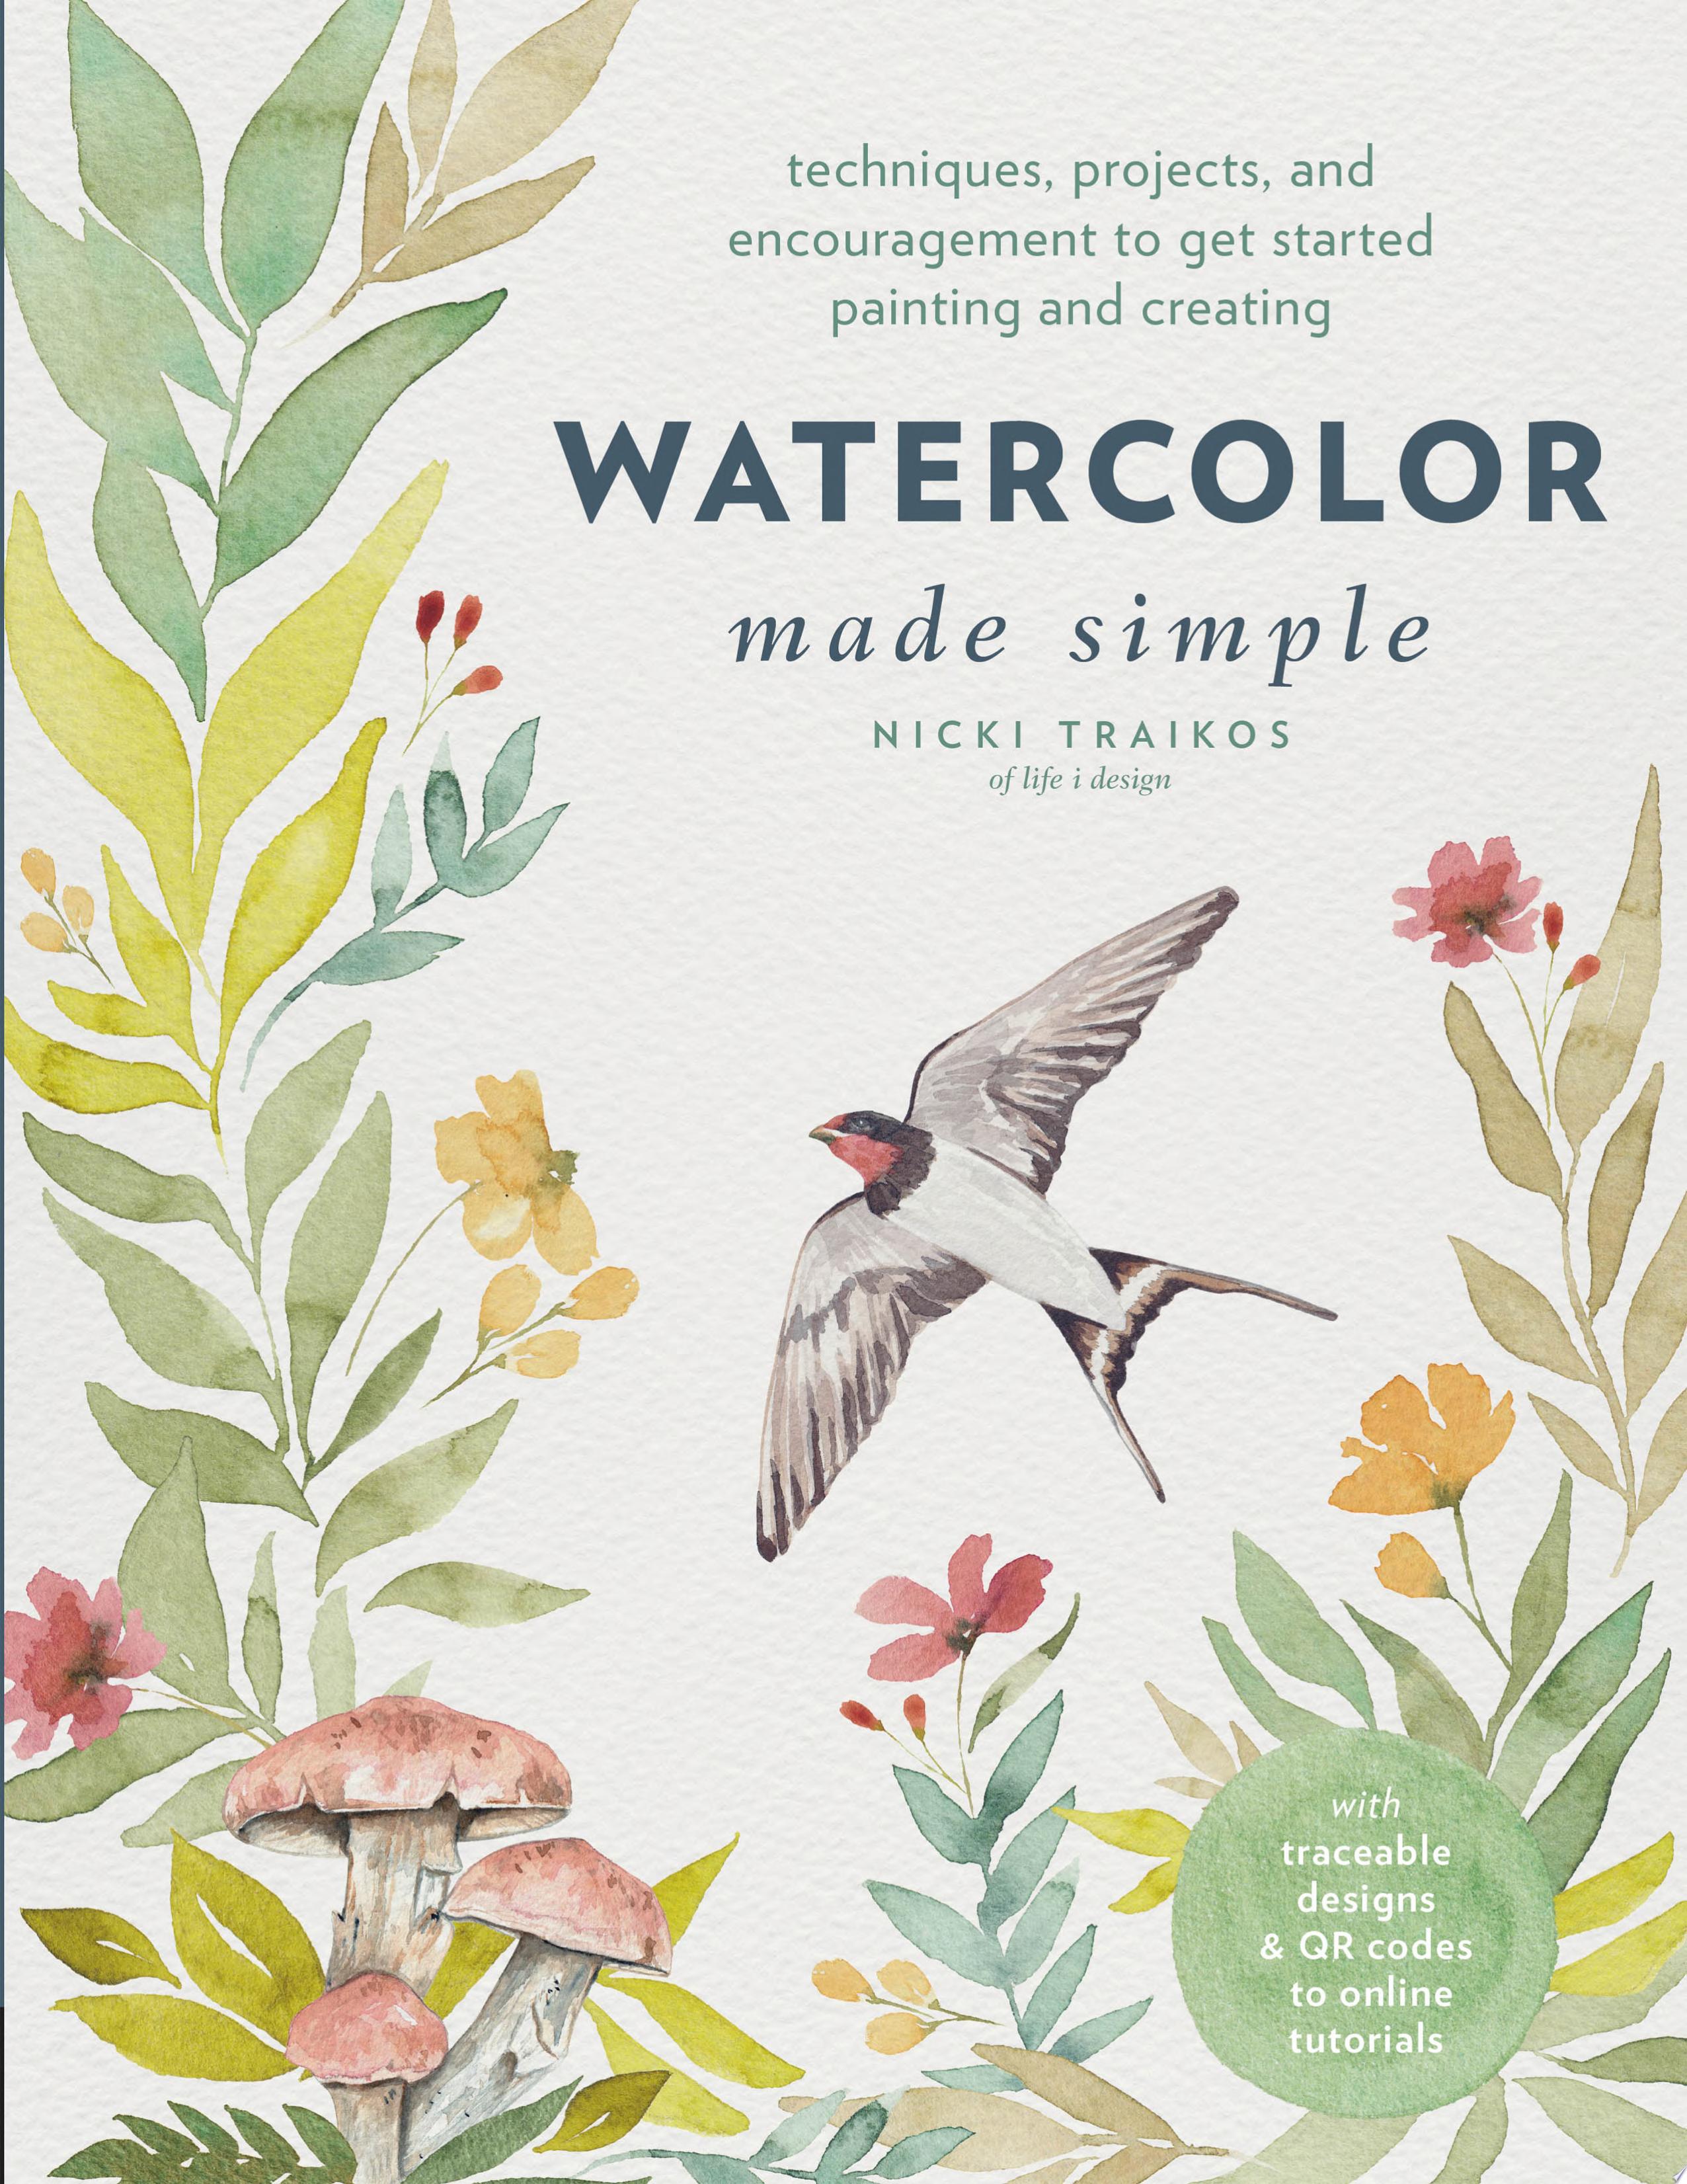 Image for "Watercolor Made Simple"